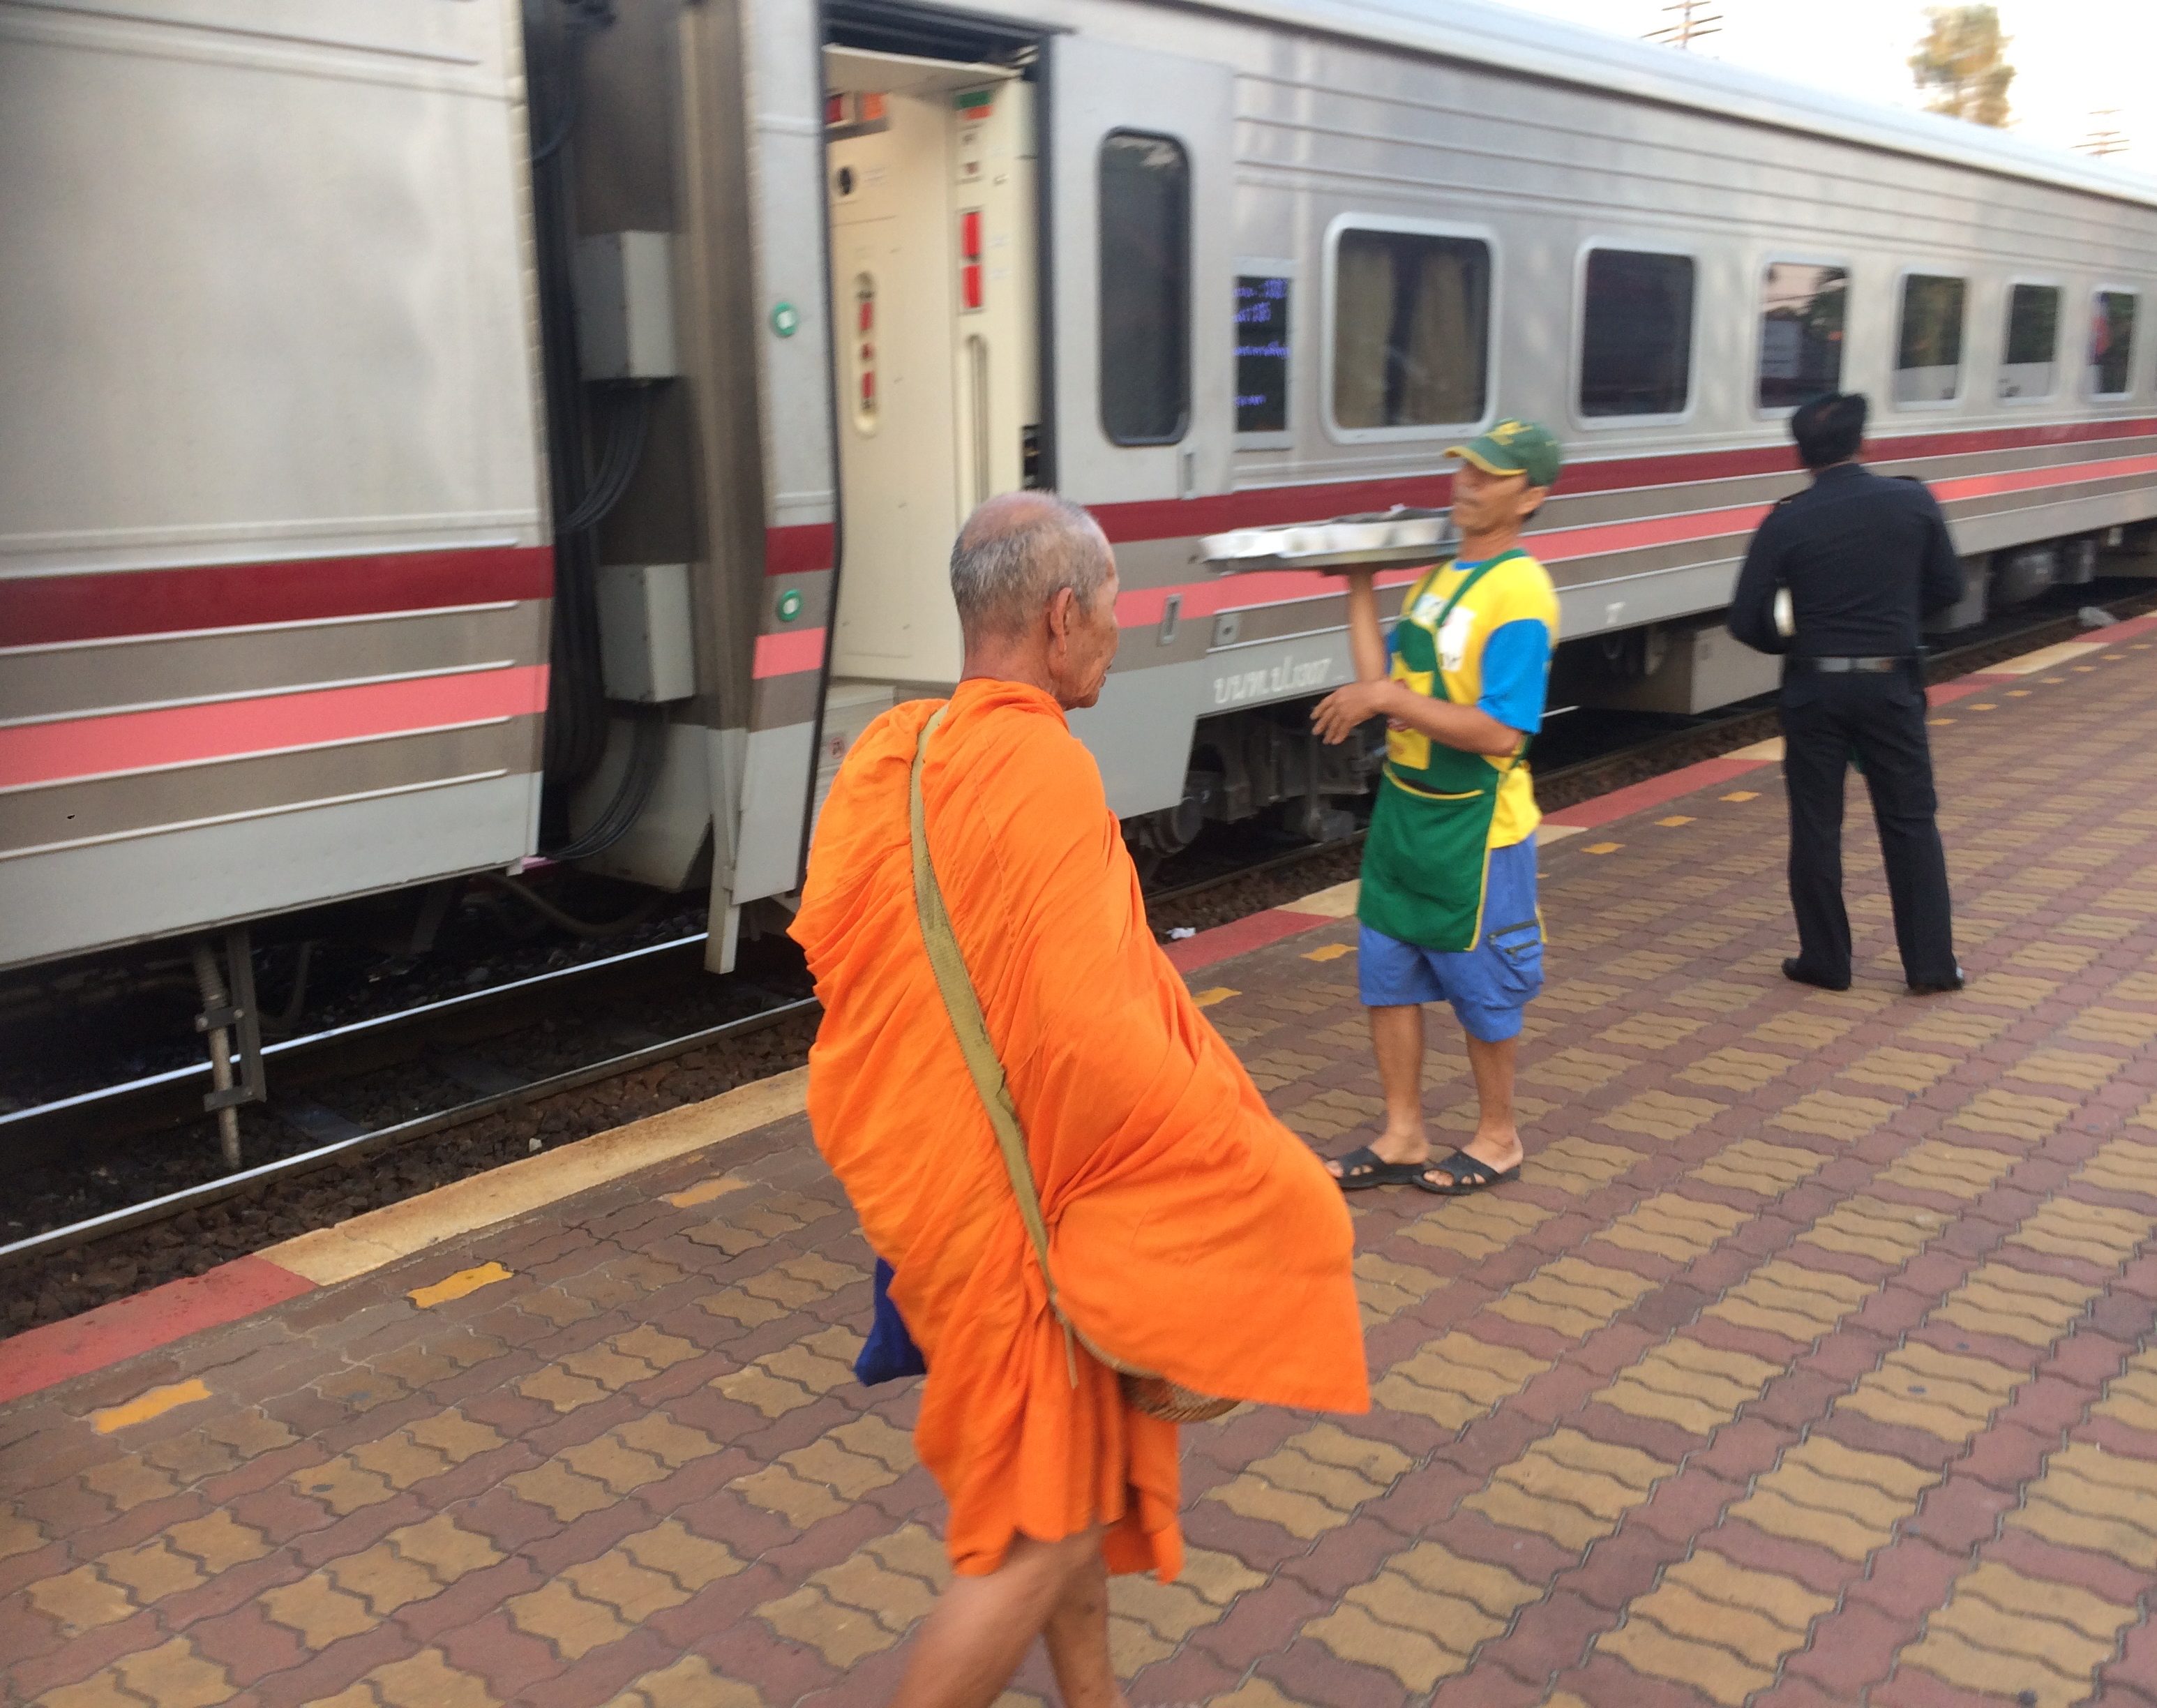 a man in an orange robe standing next to a train